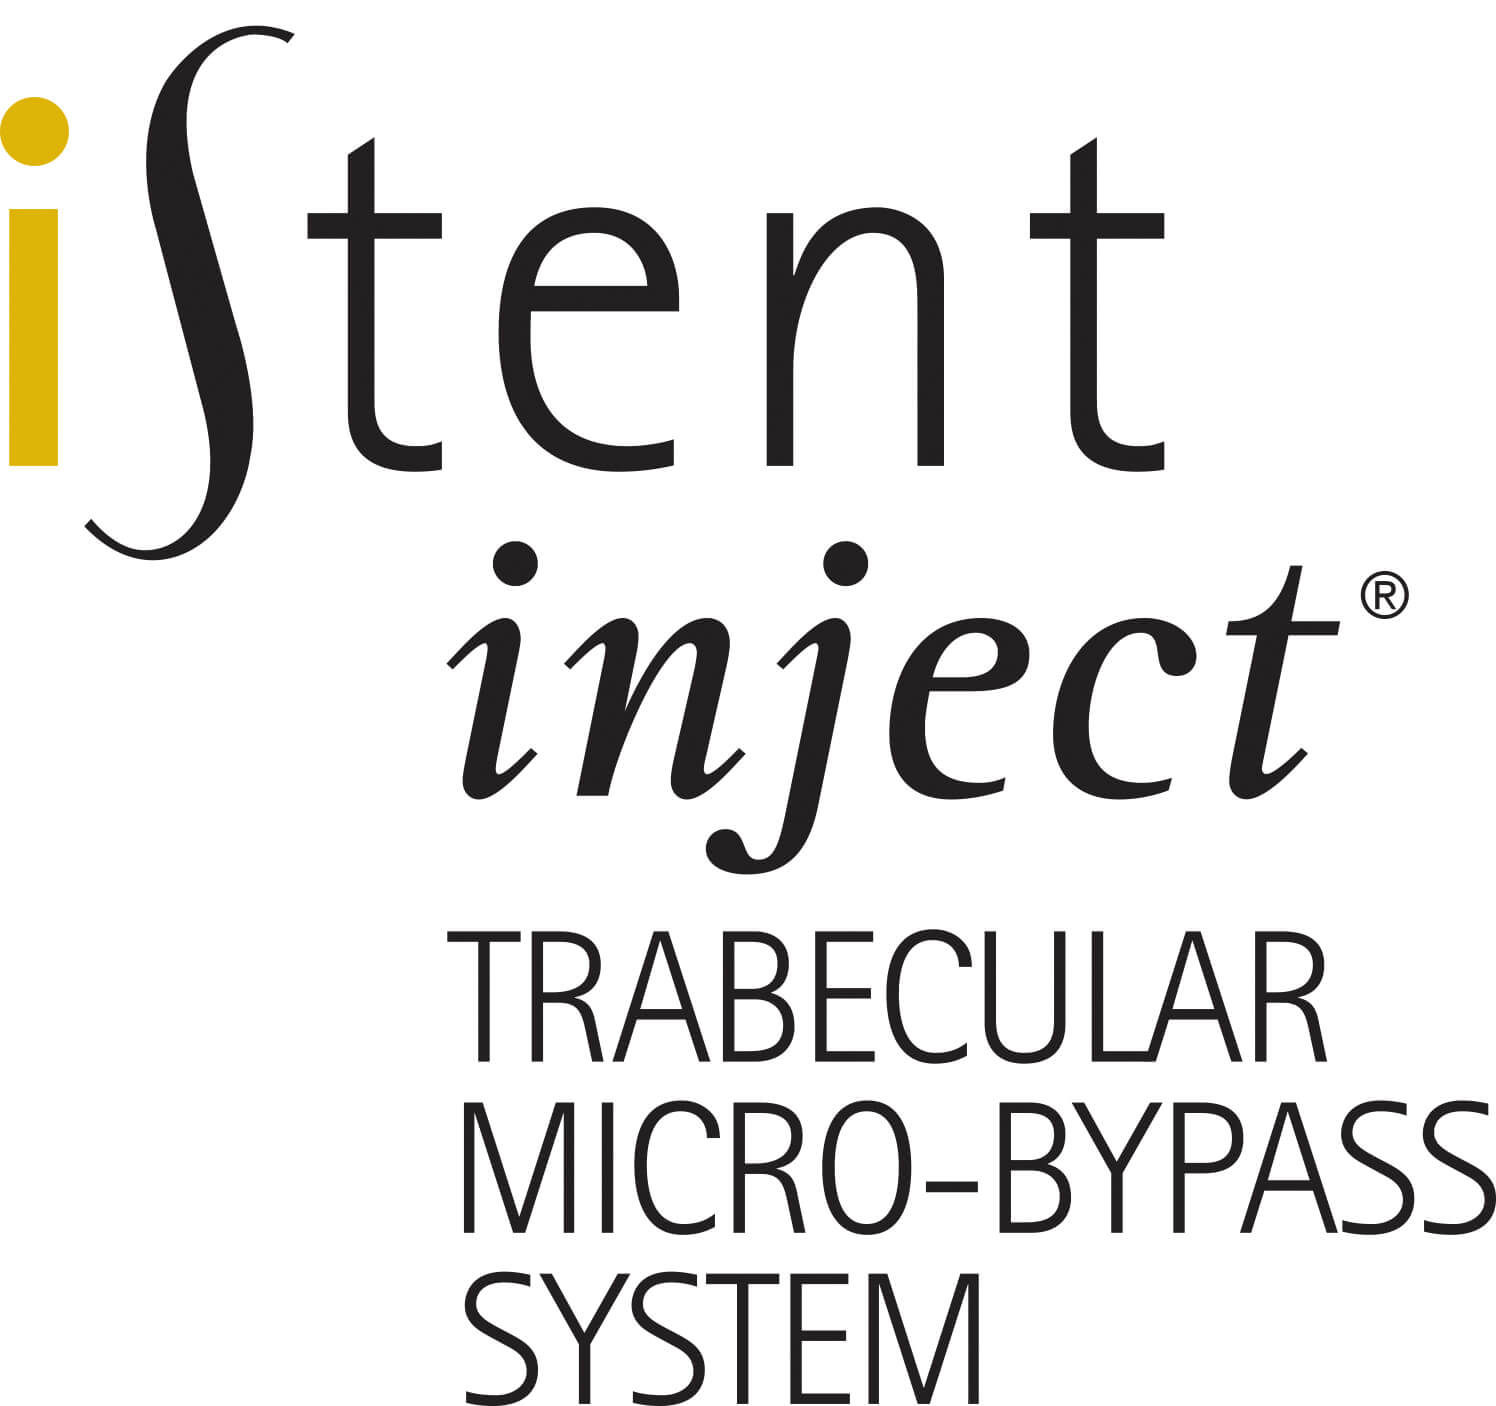 iStent inject logo that reads: iStent inject ® Trabecular Micro-Bypass System.